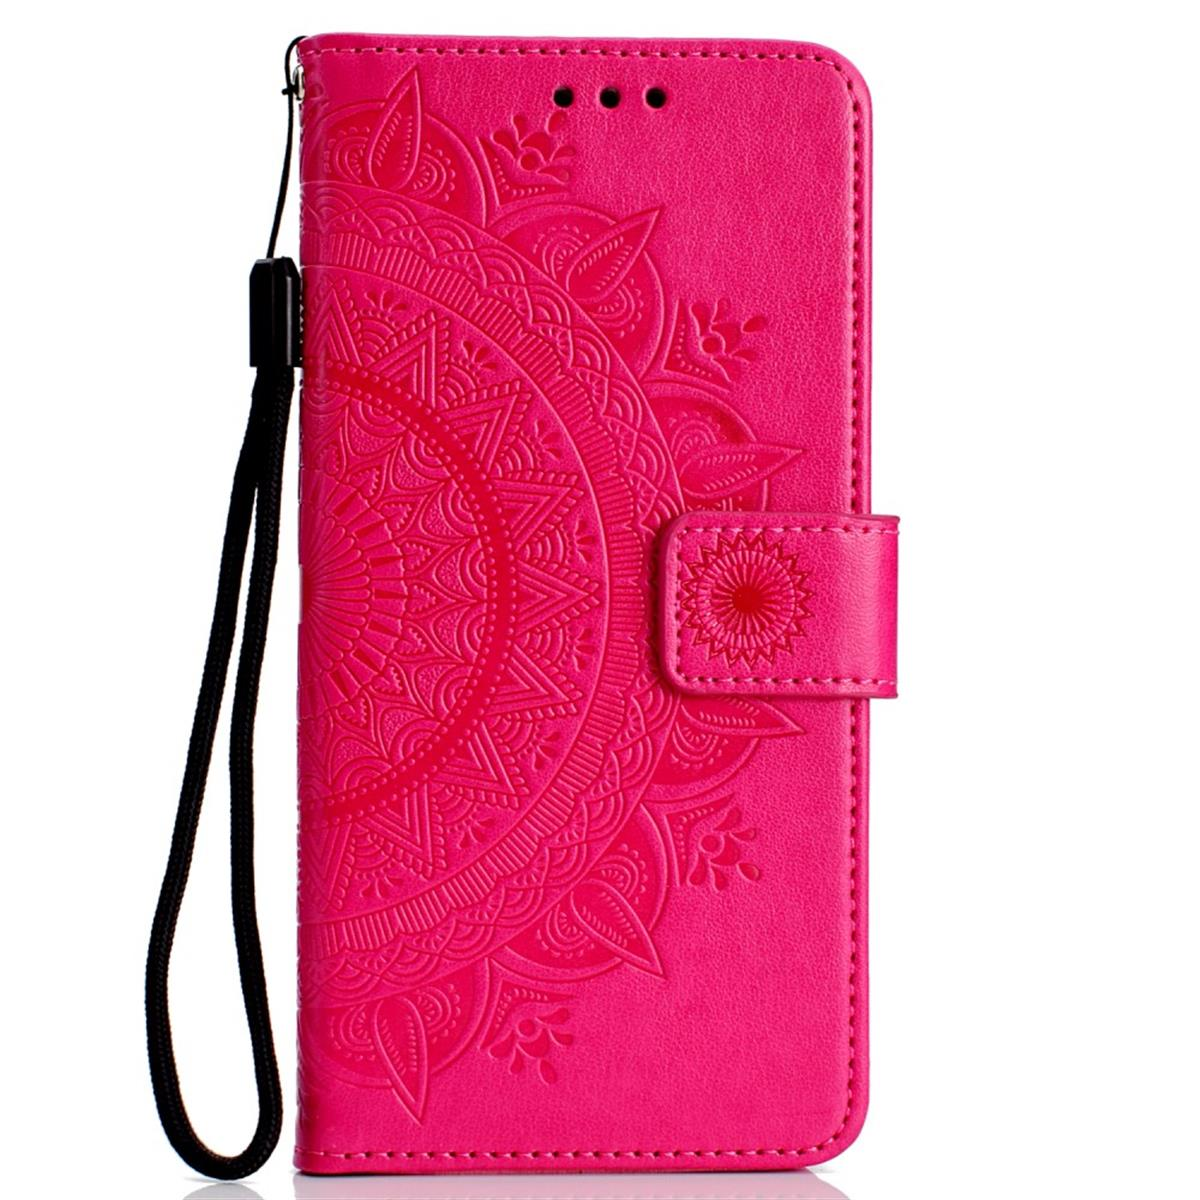 COVERKINGZ Klapphülle mit Mandala Muster, Pink 2018, Galaxy Bookcover, J4 Samsung